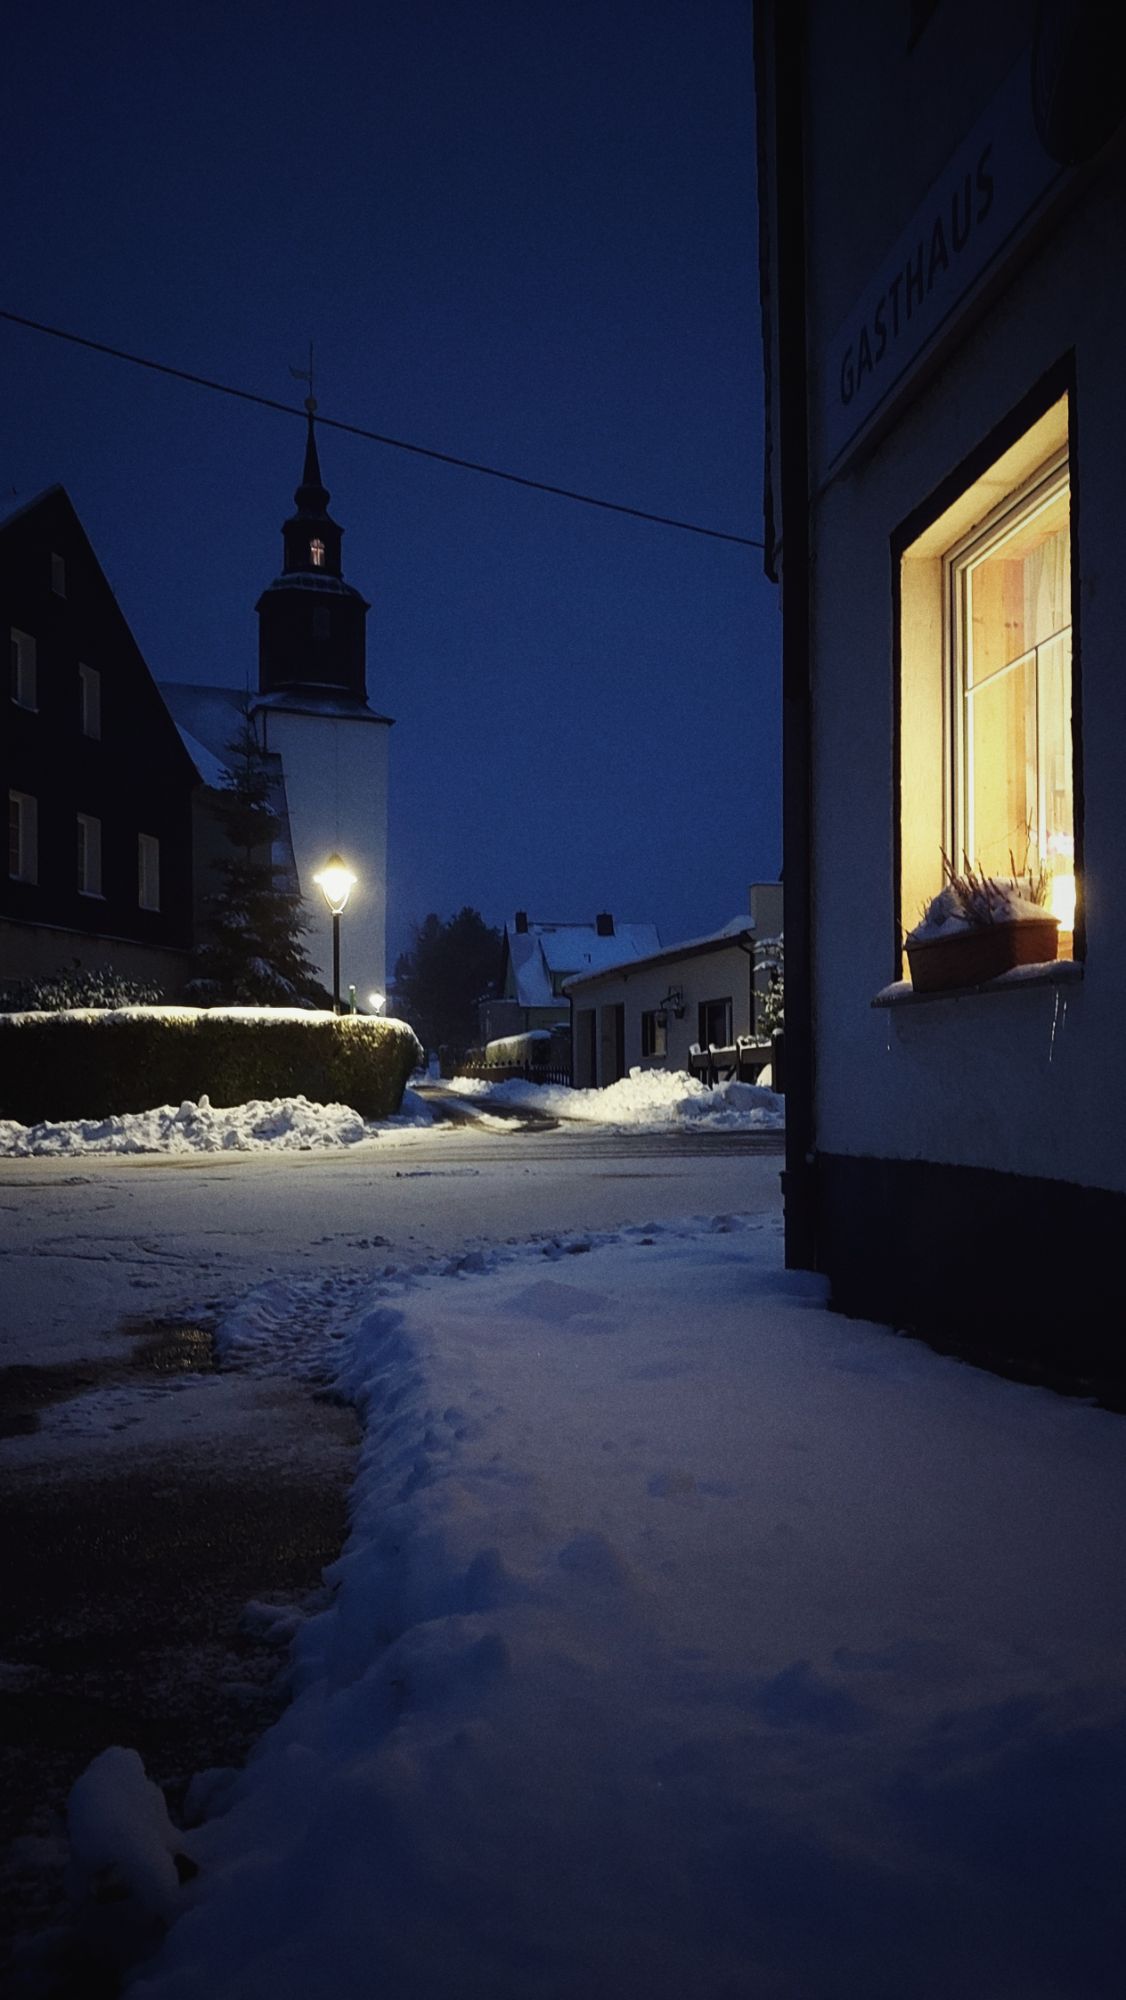 An empty village street at dusk. Warm light in a window, snow on the streets. Church and belfry in the back.